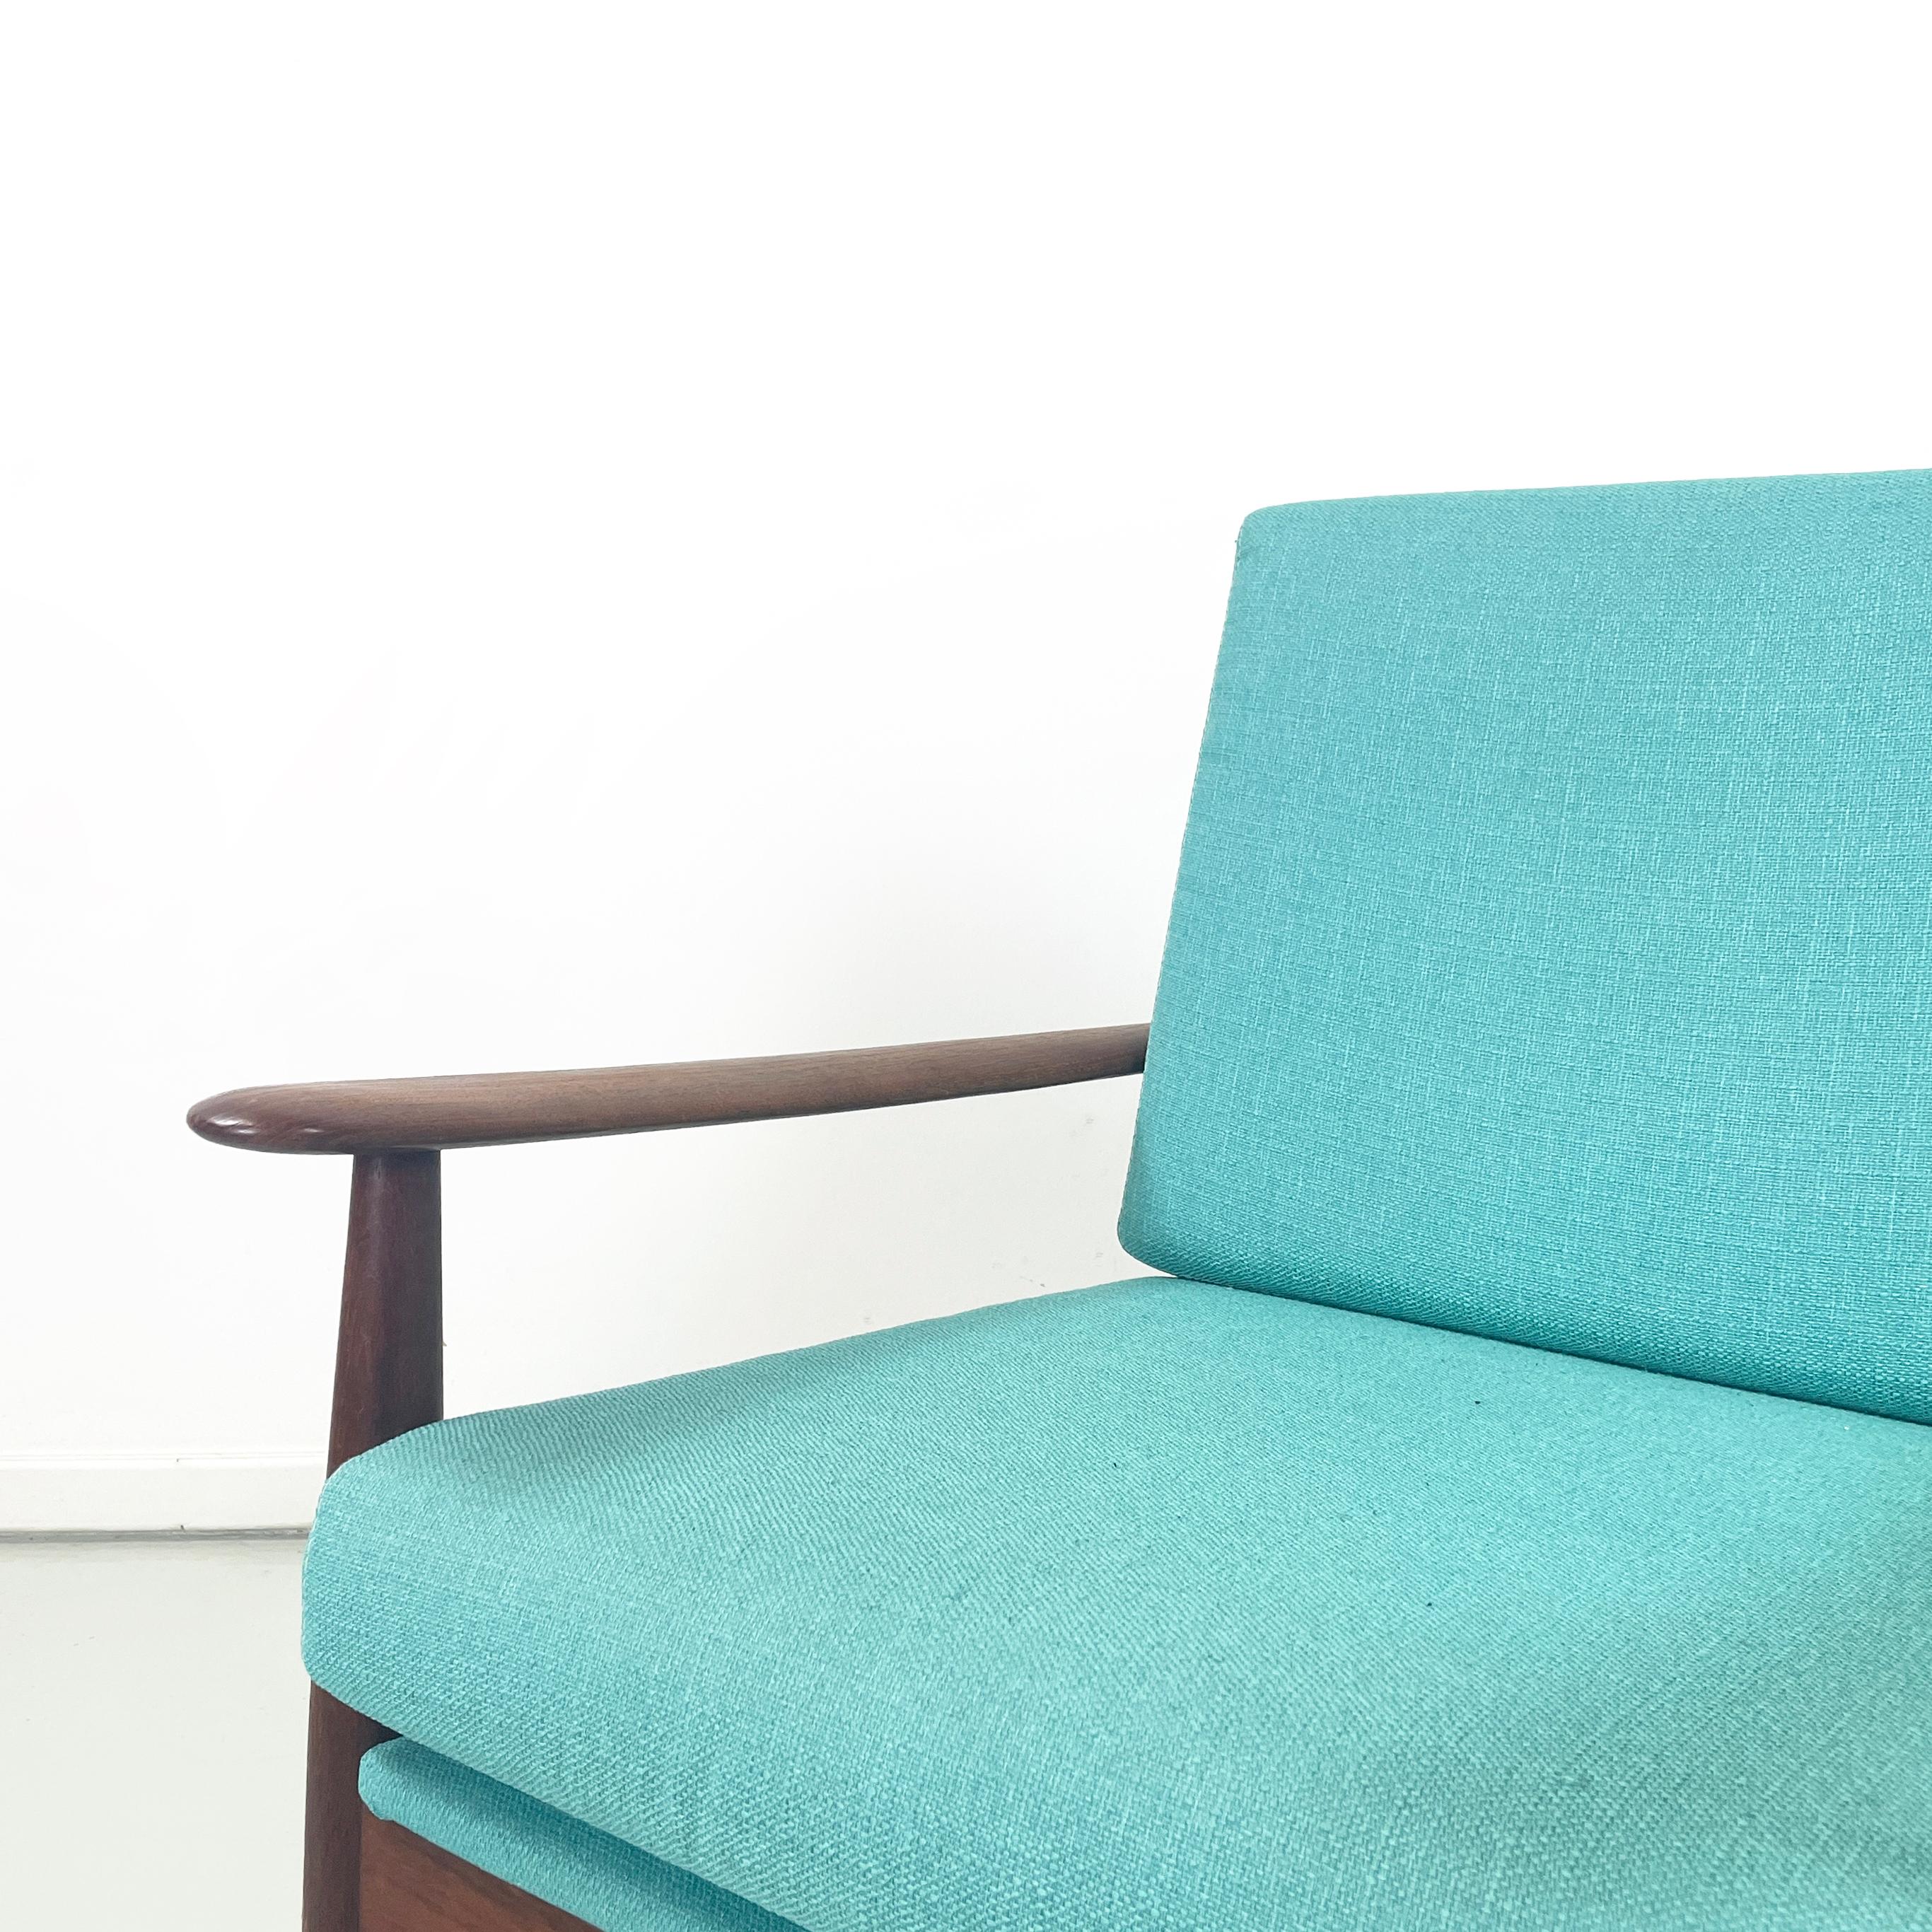 European mid-century modern Armchairs in light blue fabric and wood, 1960s For Sale 1